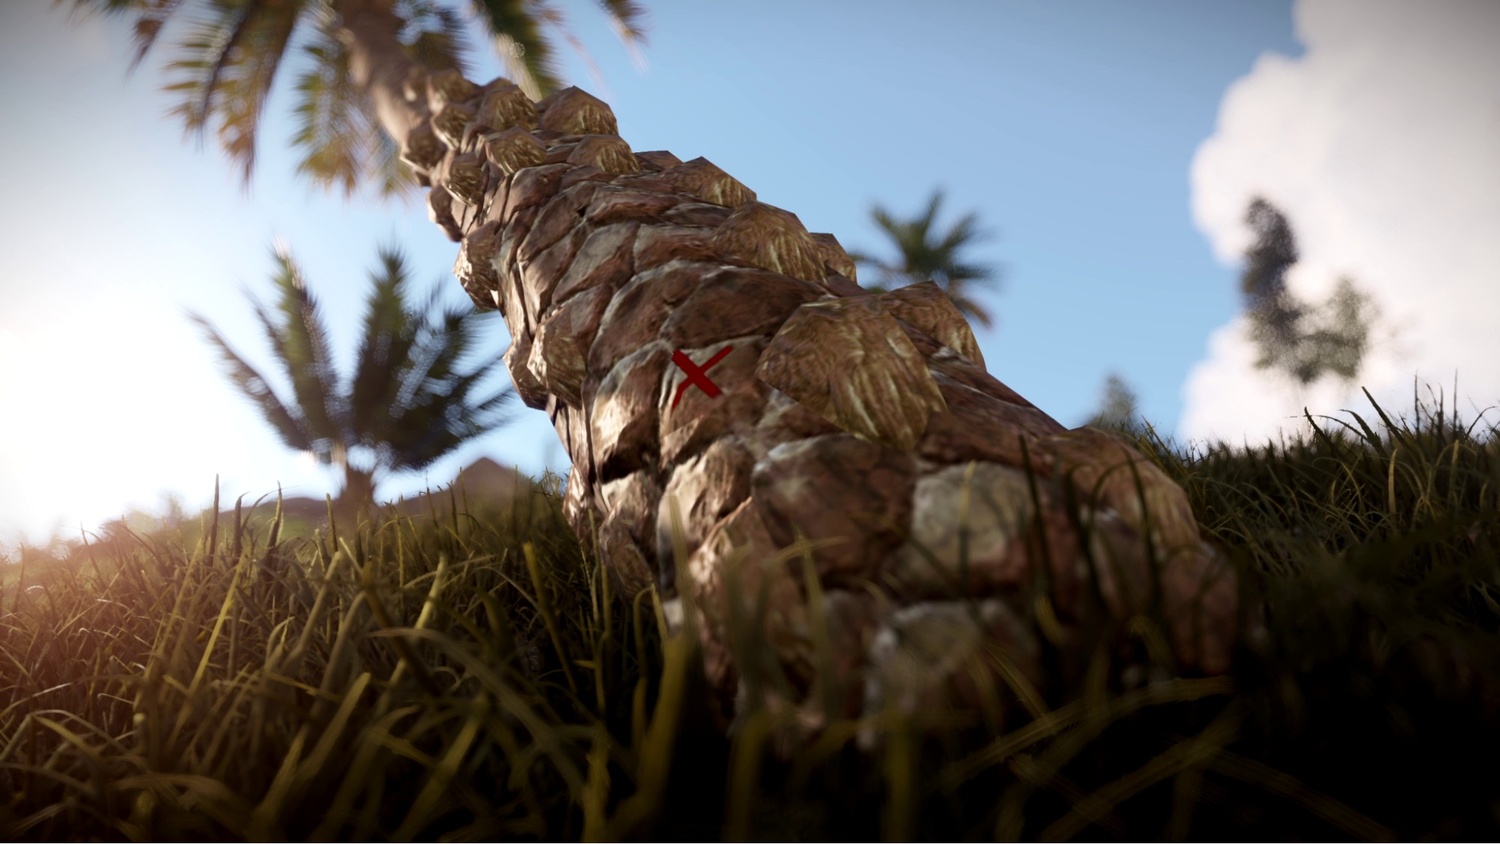 A super zoomed-in photo of a palm tree in Rust, note the attention to detail.